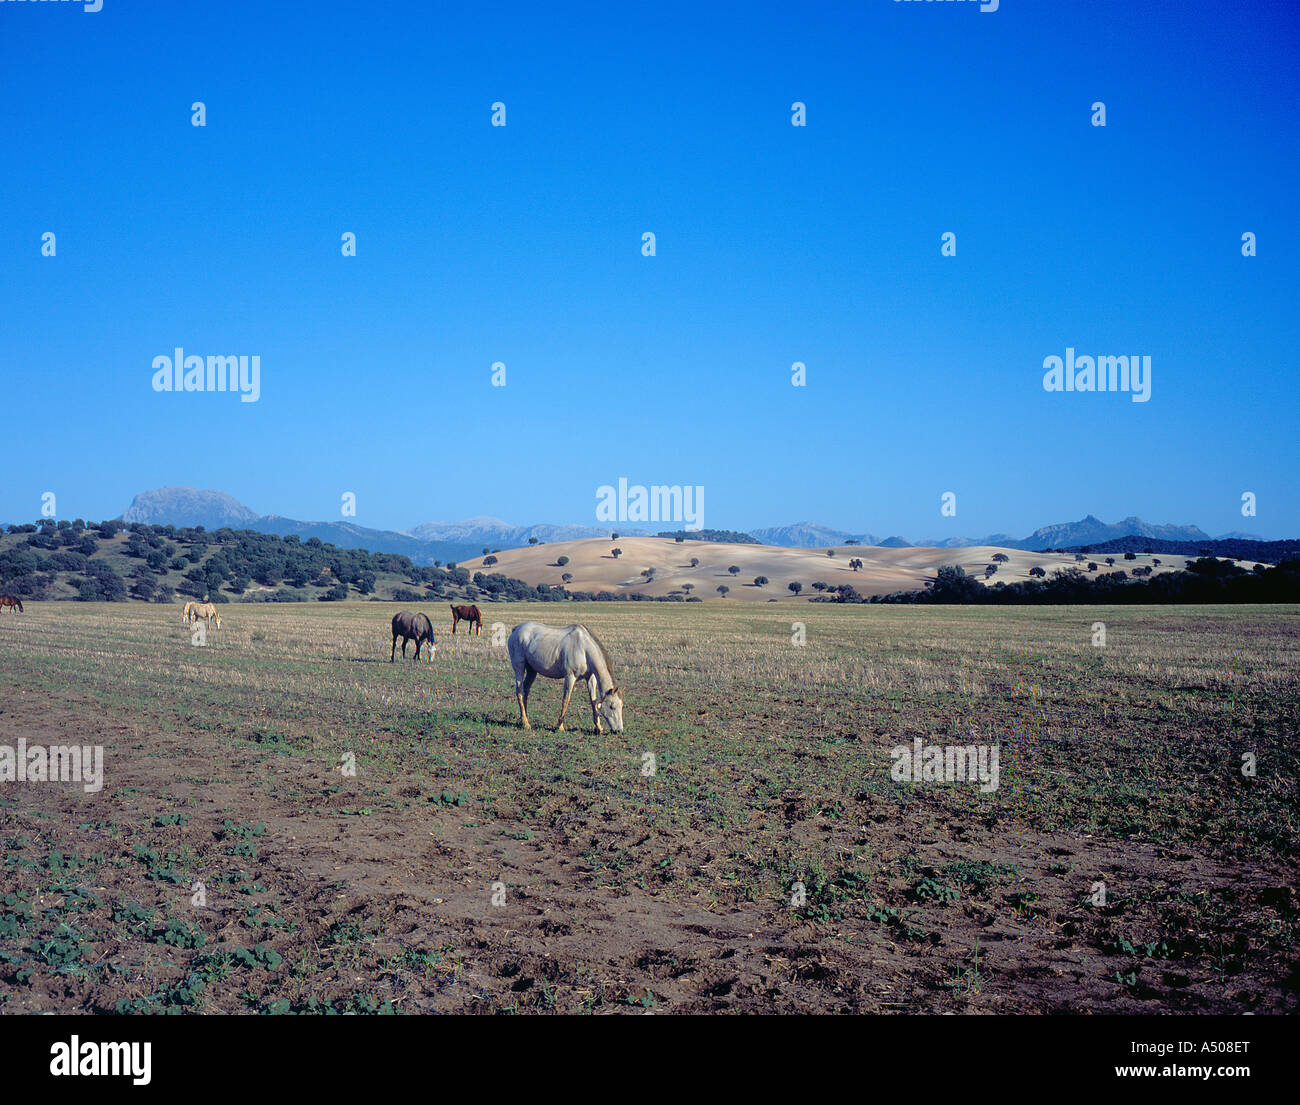 herd of Spanish horses in Andalusia, Spain, Europe. Photo by Willy Matheisl Stock Photo